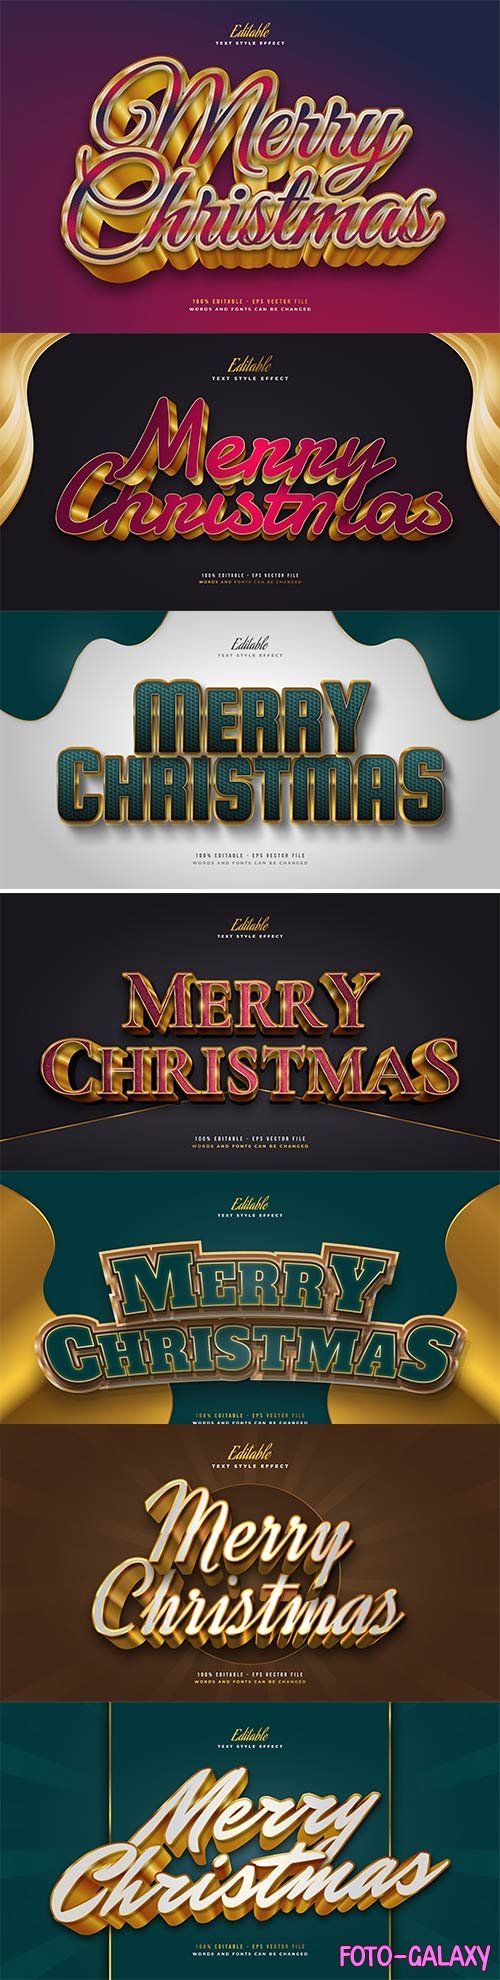 Merry christmas and happy new year 2022 editable vector text effects vol 25